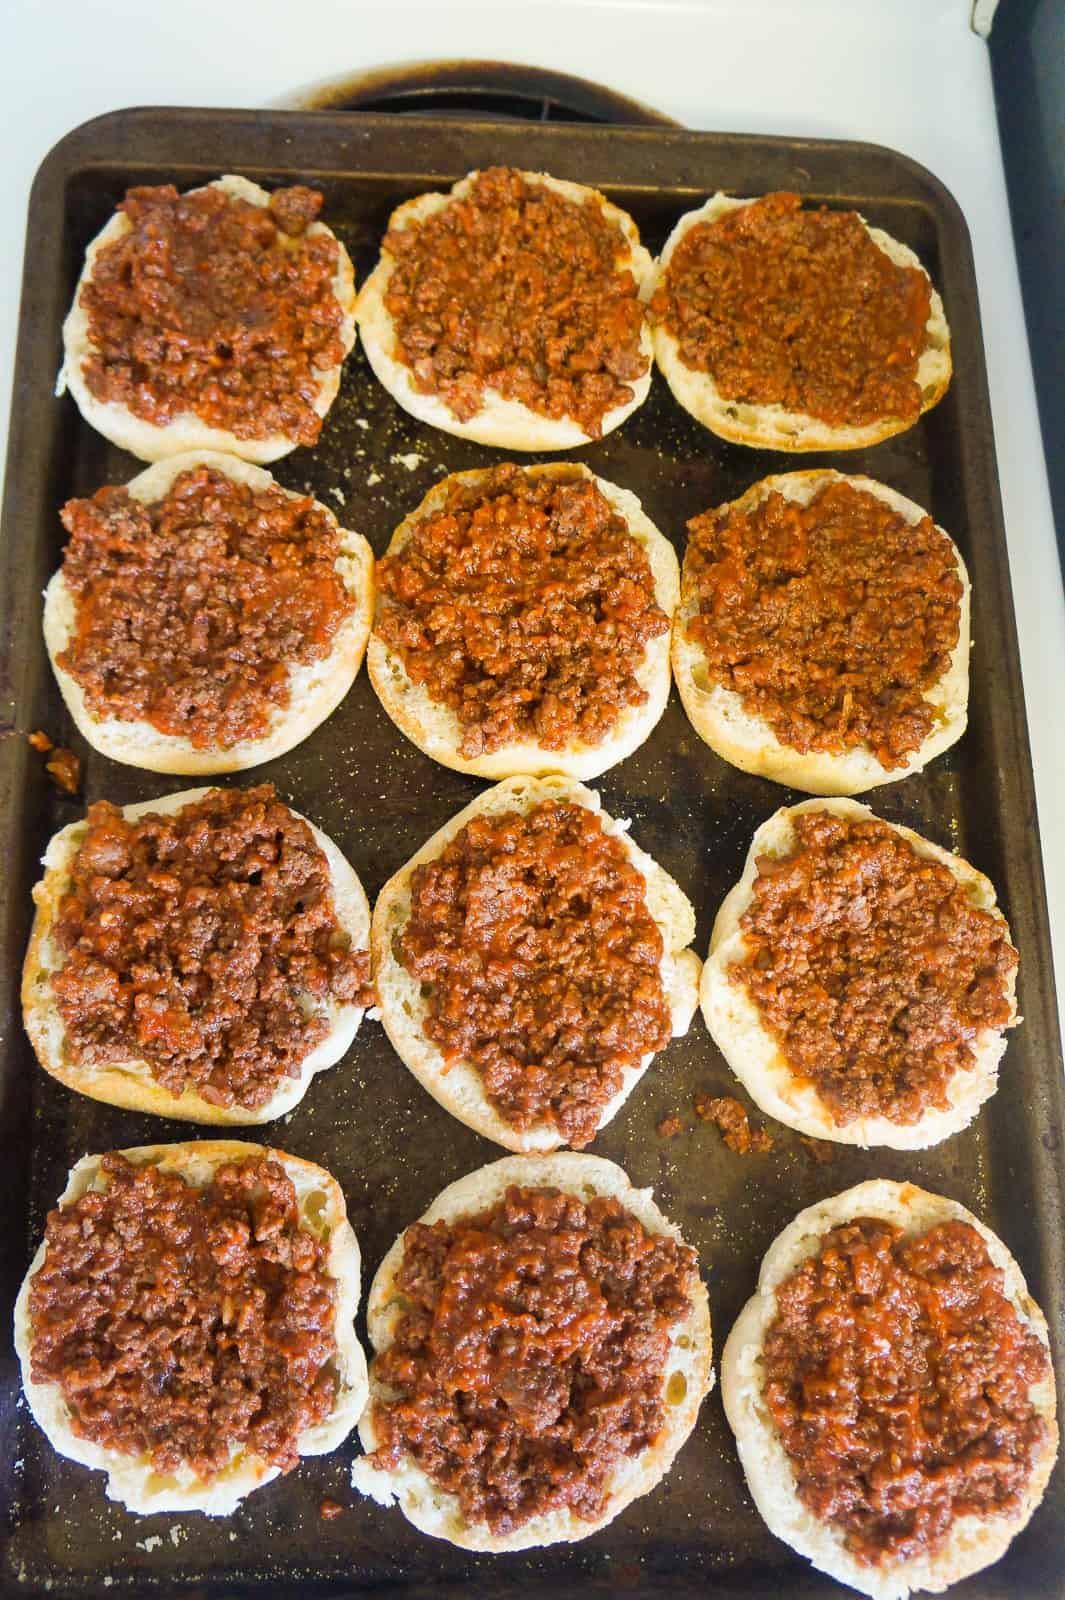 ground beef and pizza sauce on english muffins